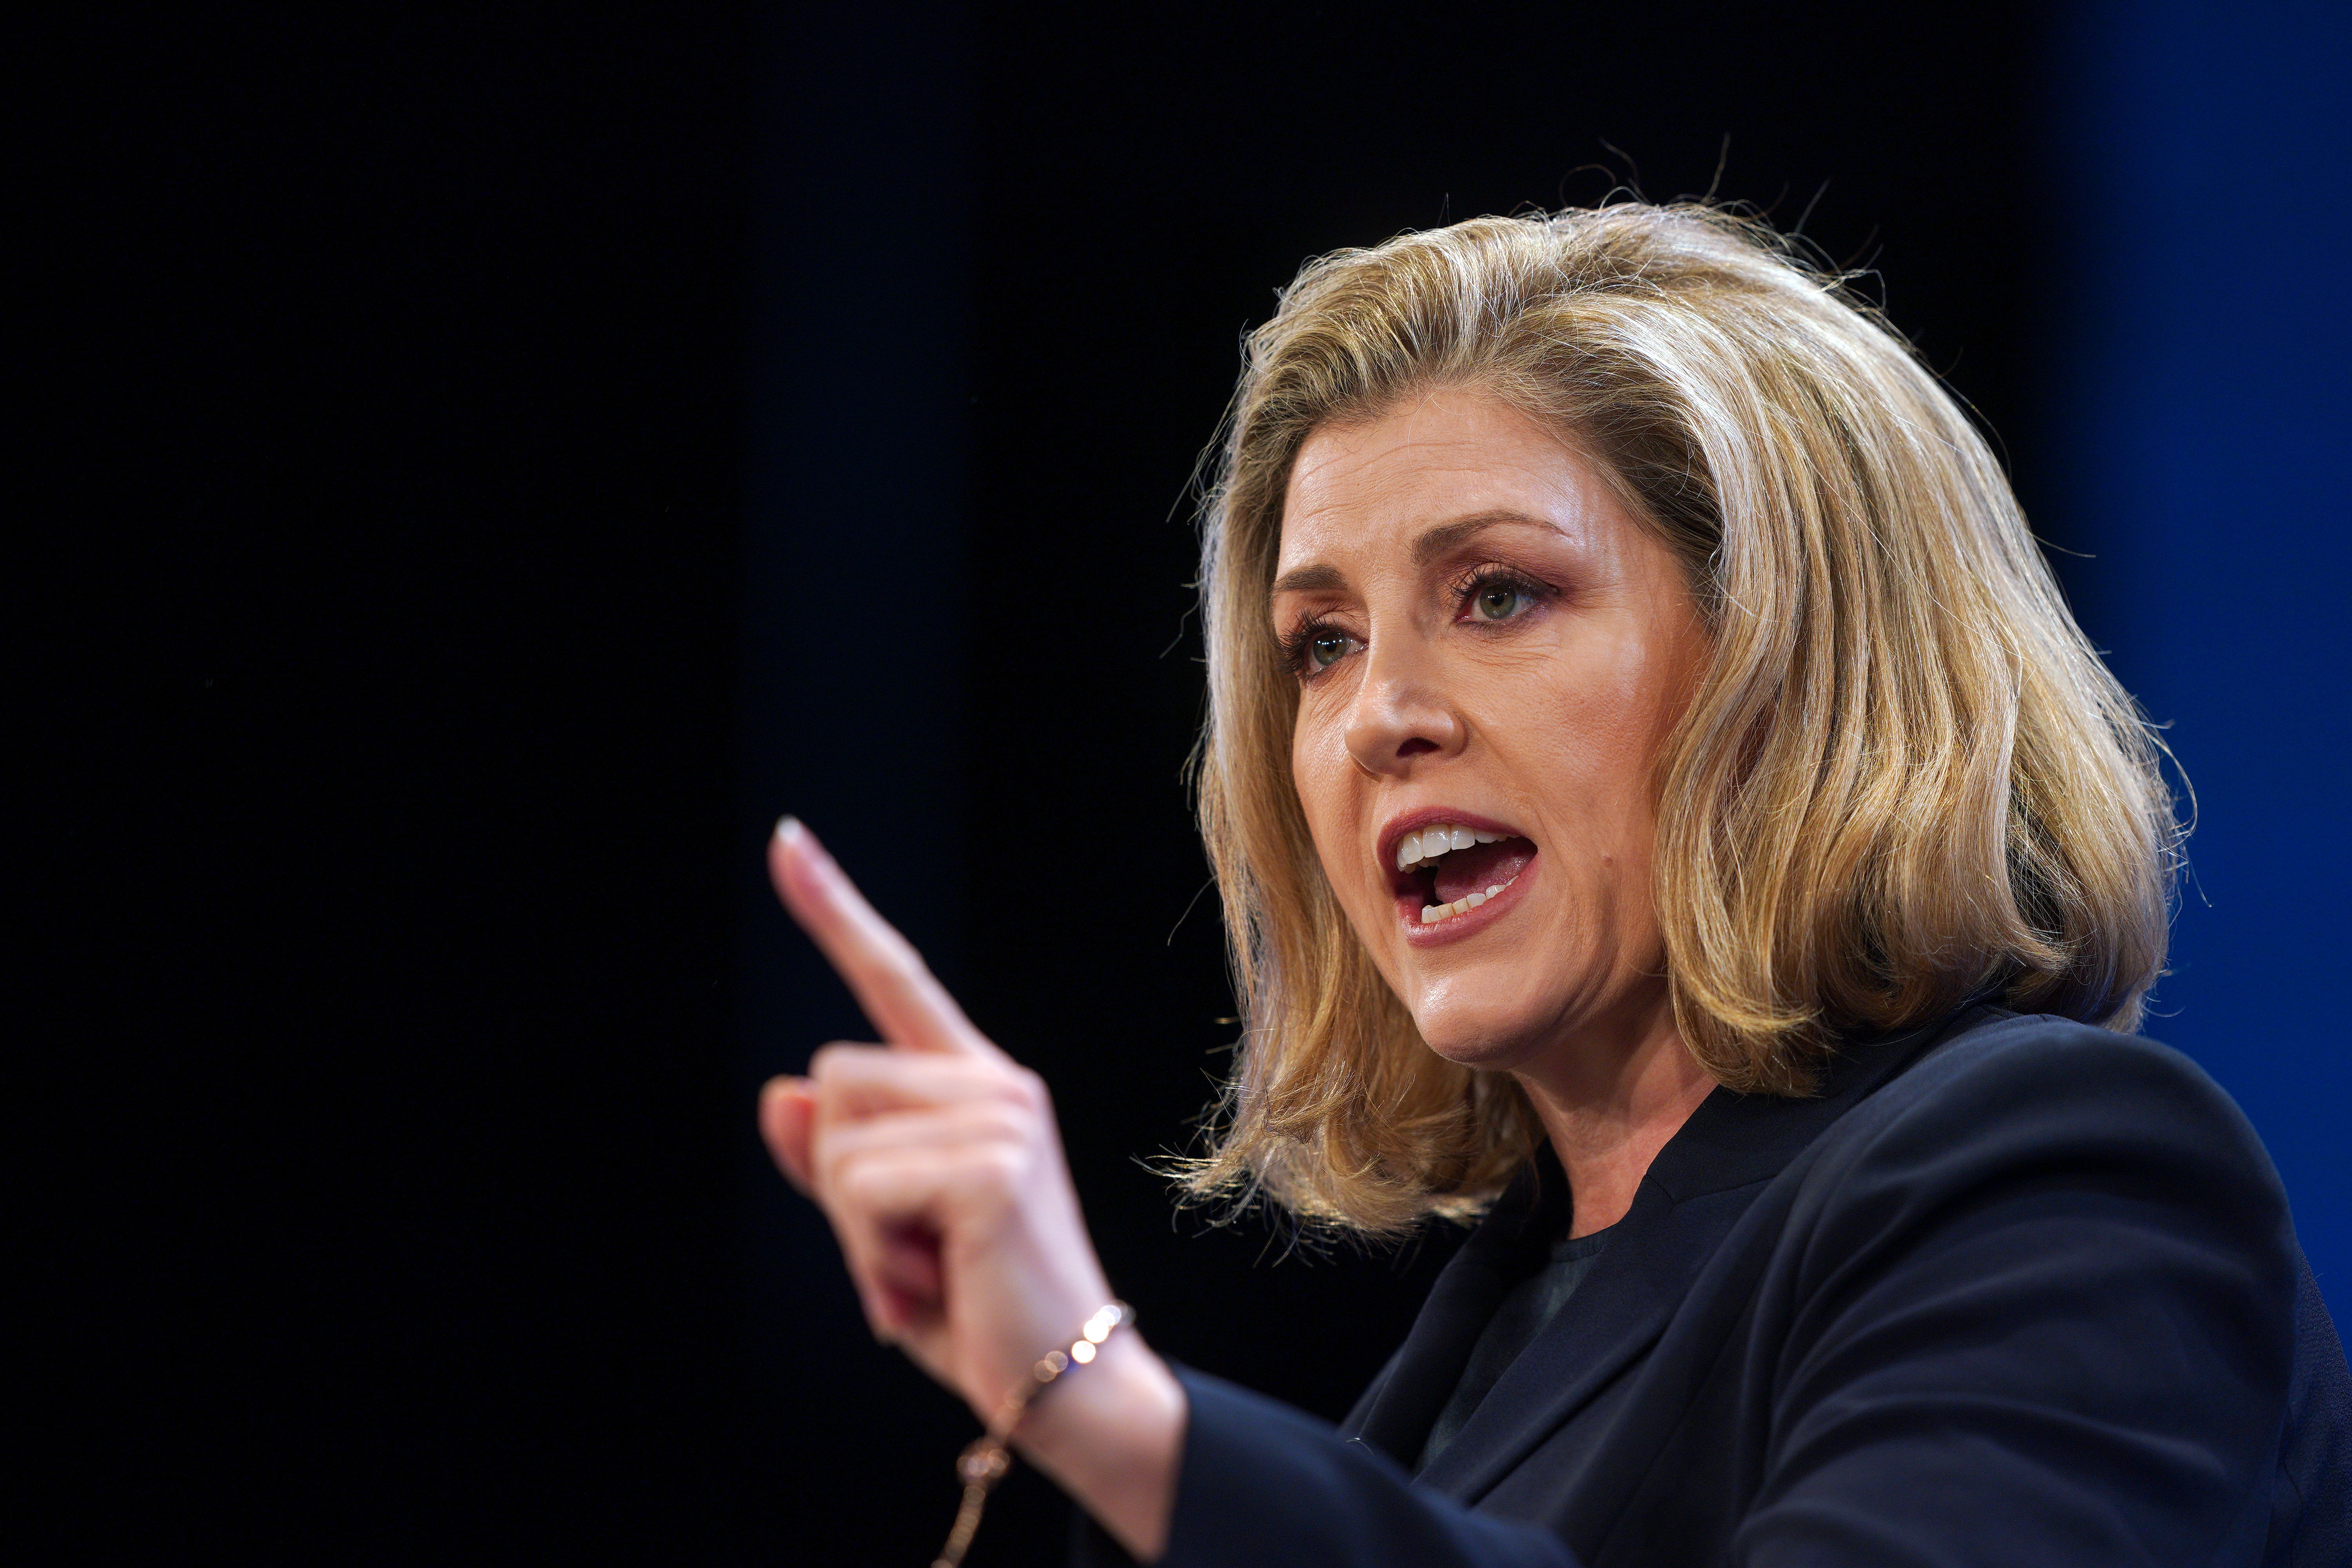 Penny Mordaunt said many MPs were ‘enduring’ abuse and threats